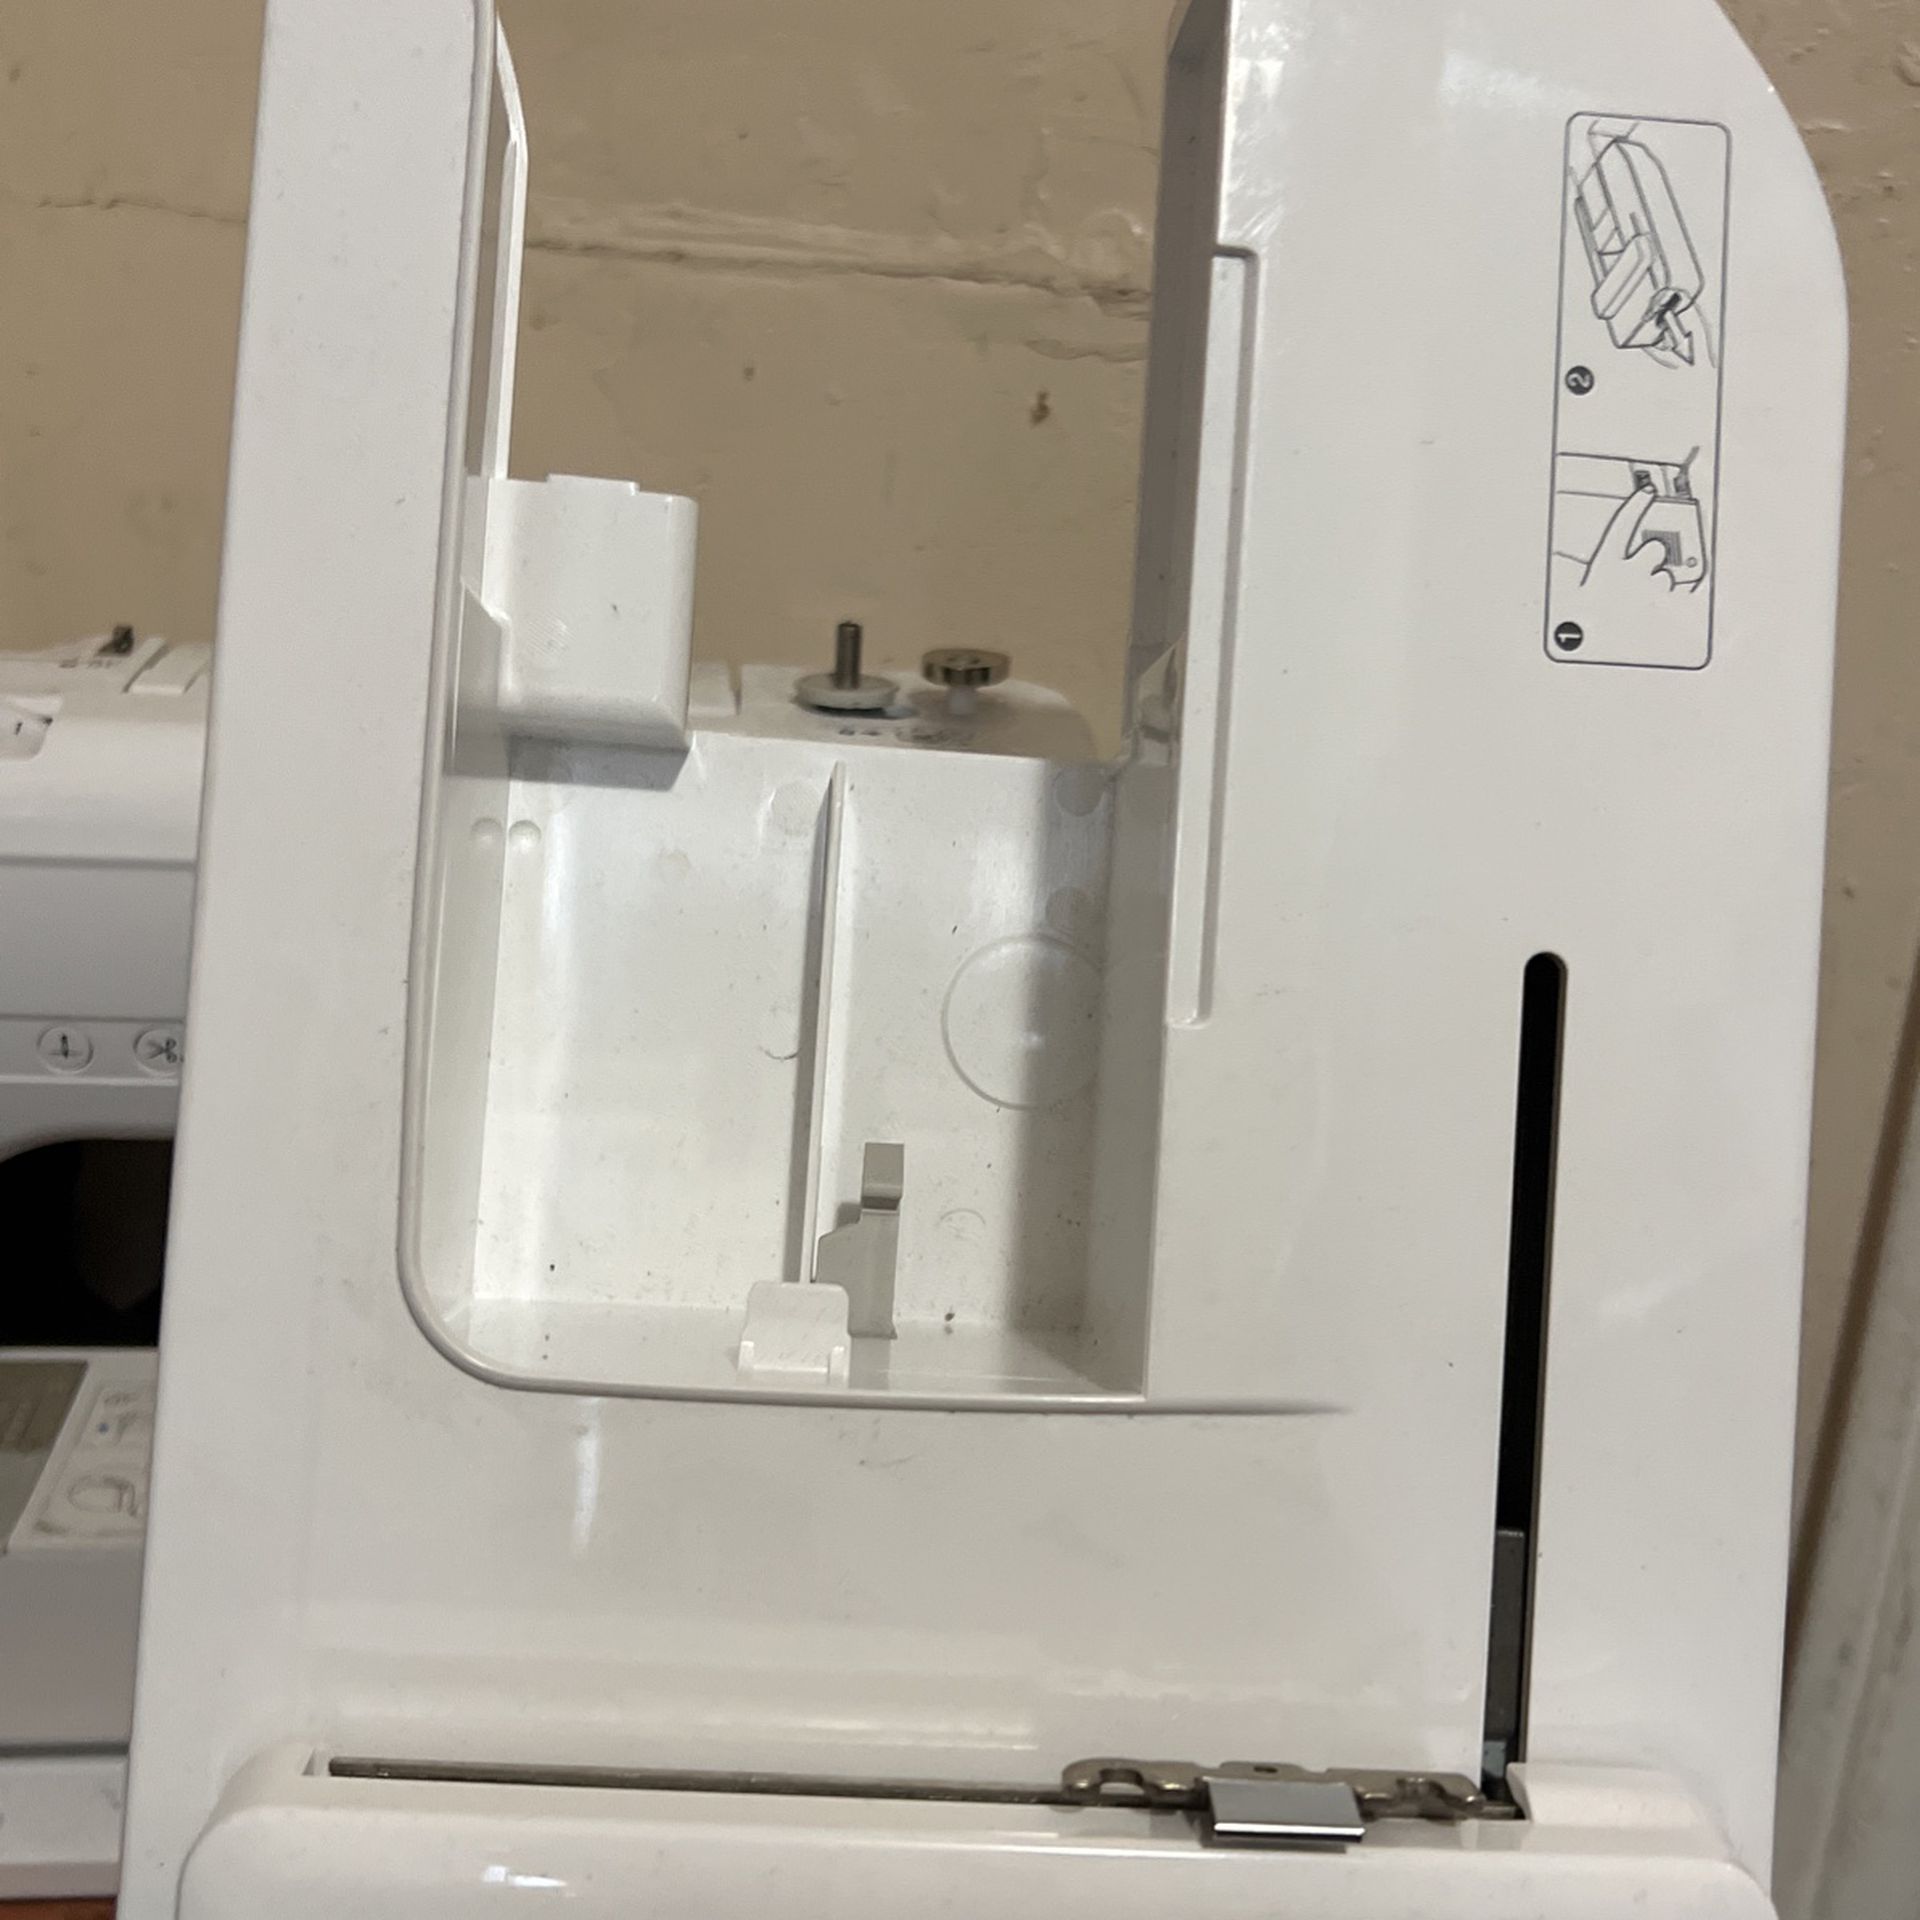 Brother SE630 Sewing Machine for Sale in Salem, OR - OfferUp